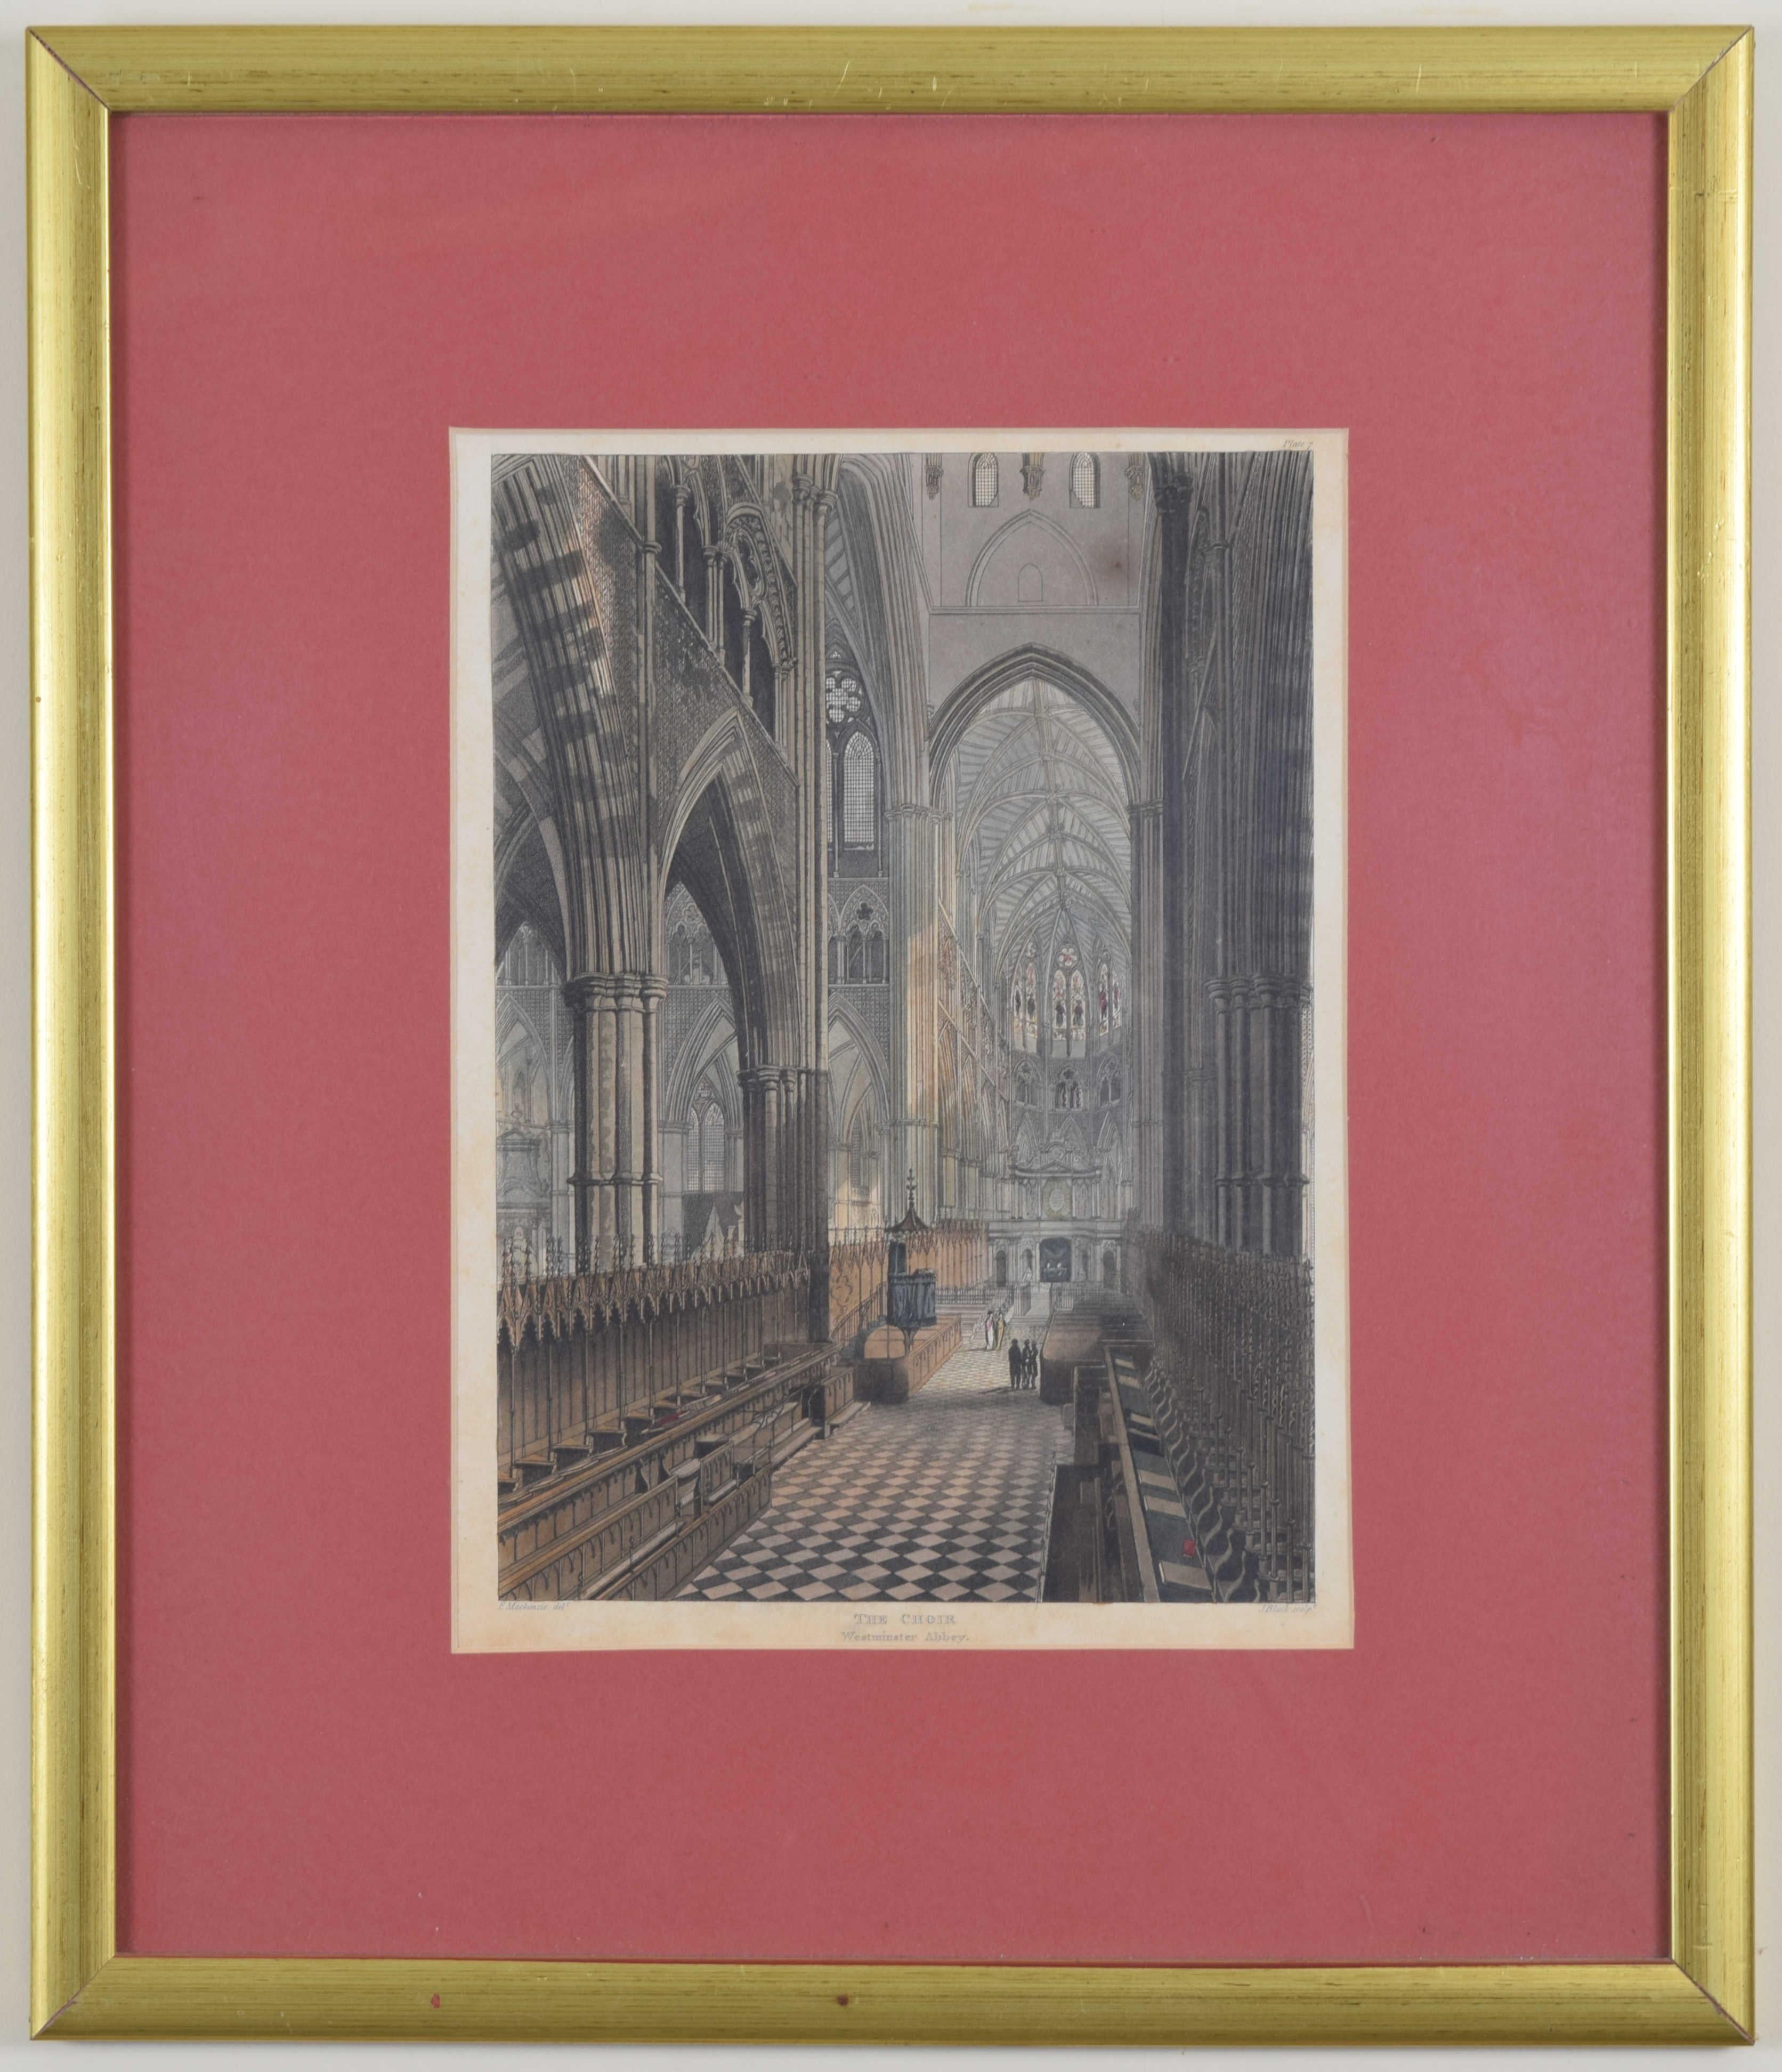 To see our other Oxford and Cambridge pictures, including an extensive collection of works by Ackermann, scroll down to 